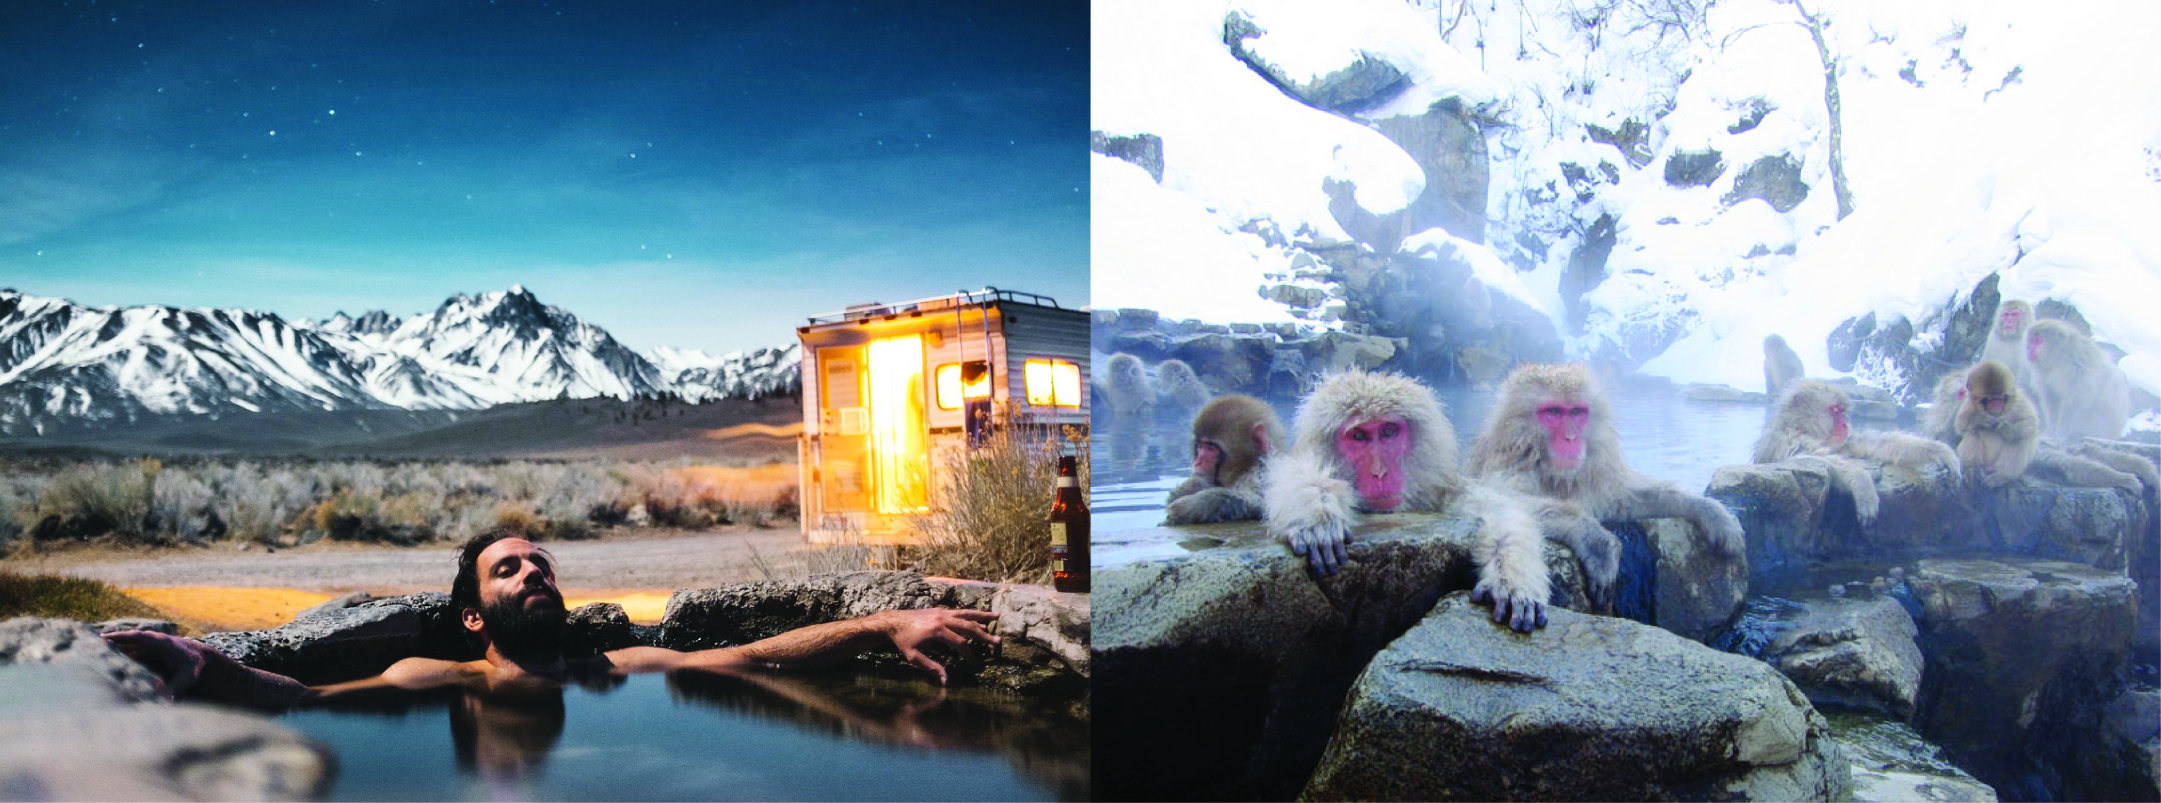 Left, a man in a hot spring. Right, monkeys in a hot spring.